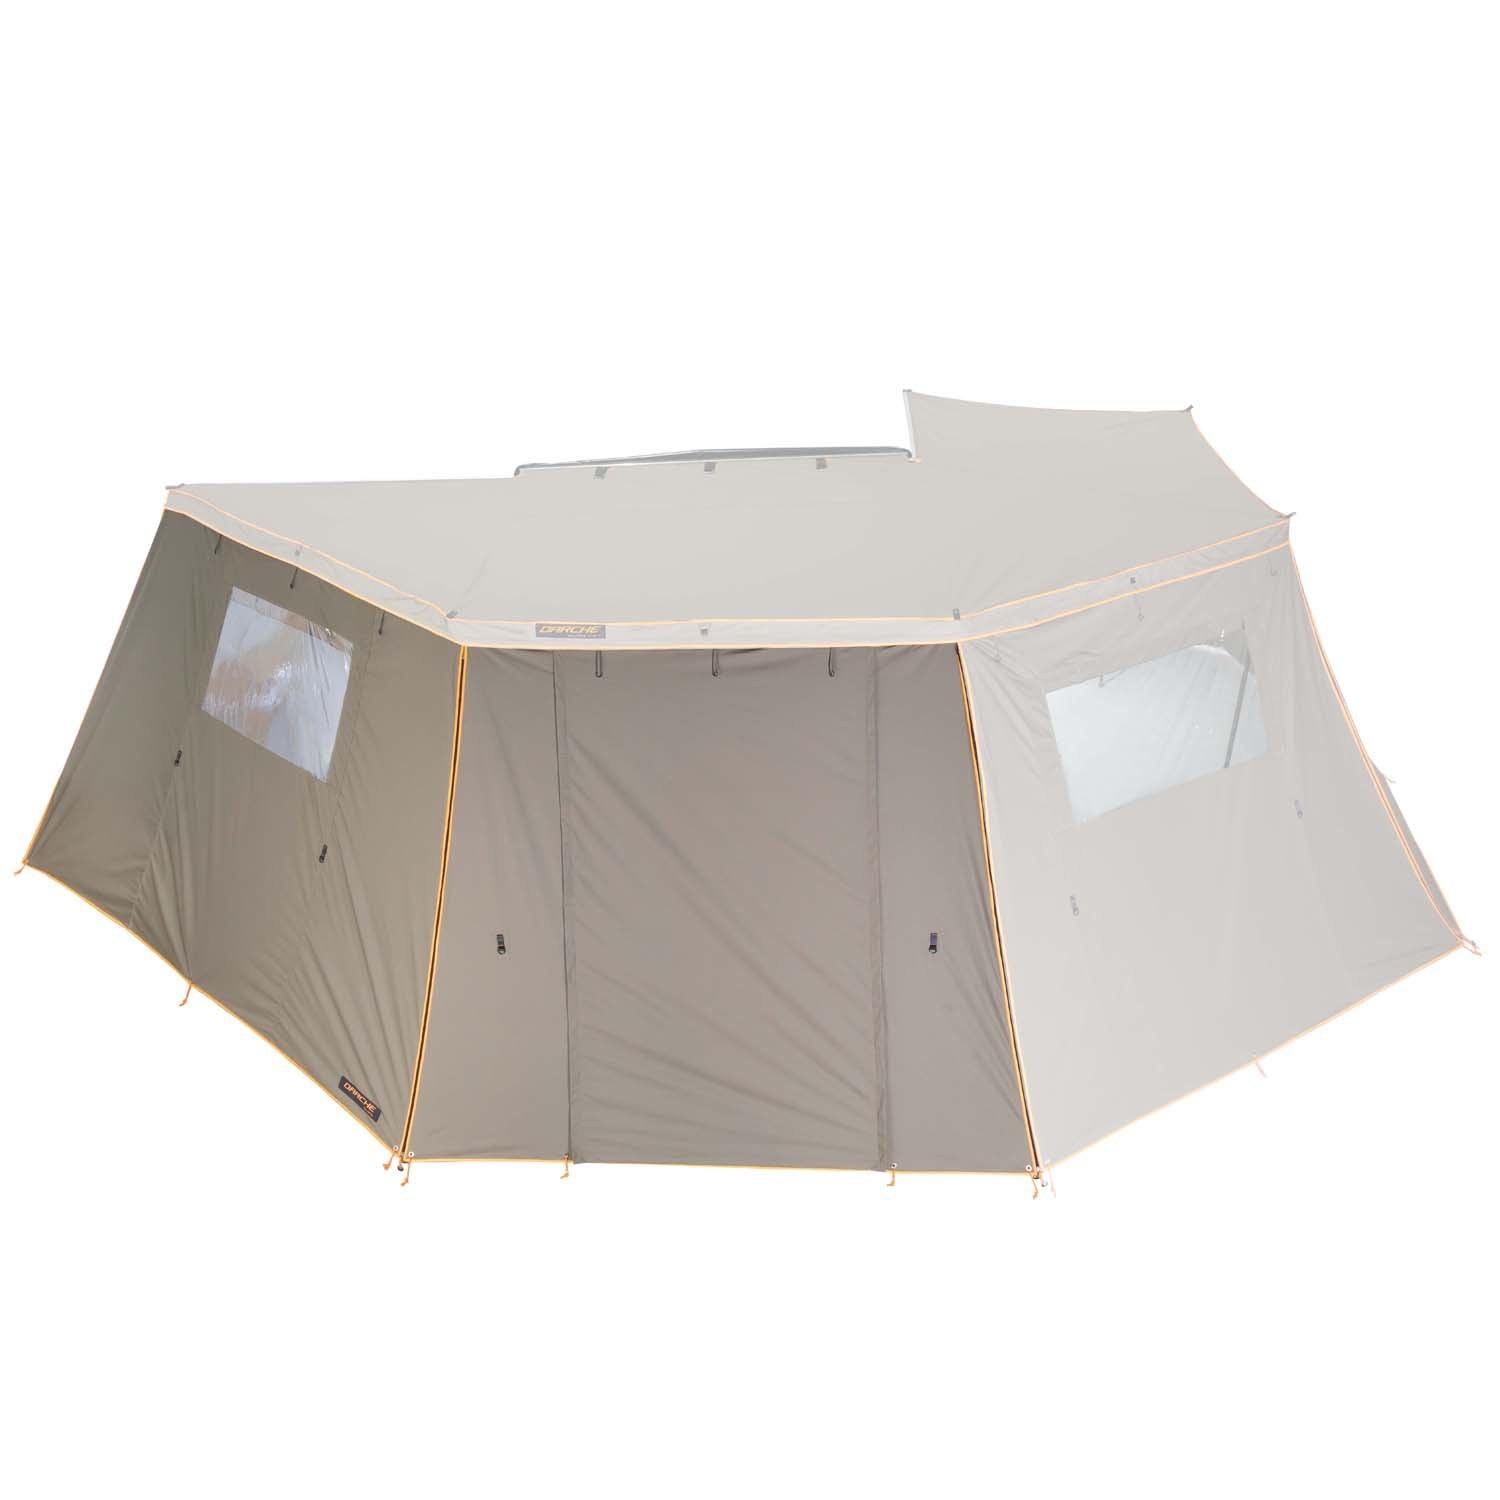 Eclipse 270 Wall ECLIPSE 270 WALL 1 WINDOW LEFT GEN 2 Shelters Darche- Adventure Imports